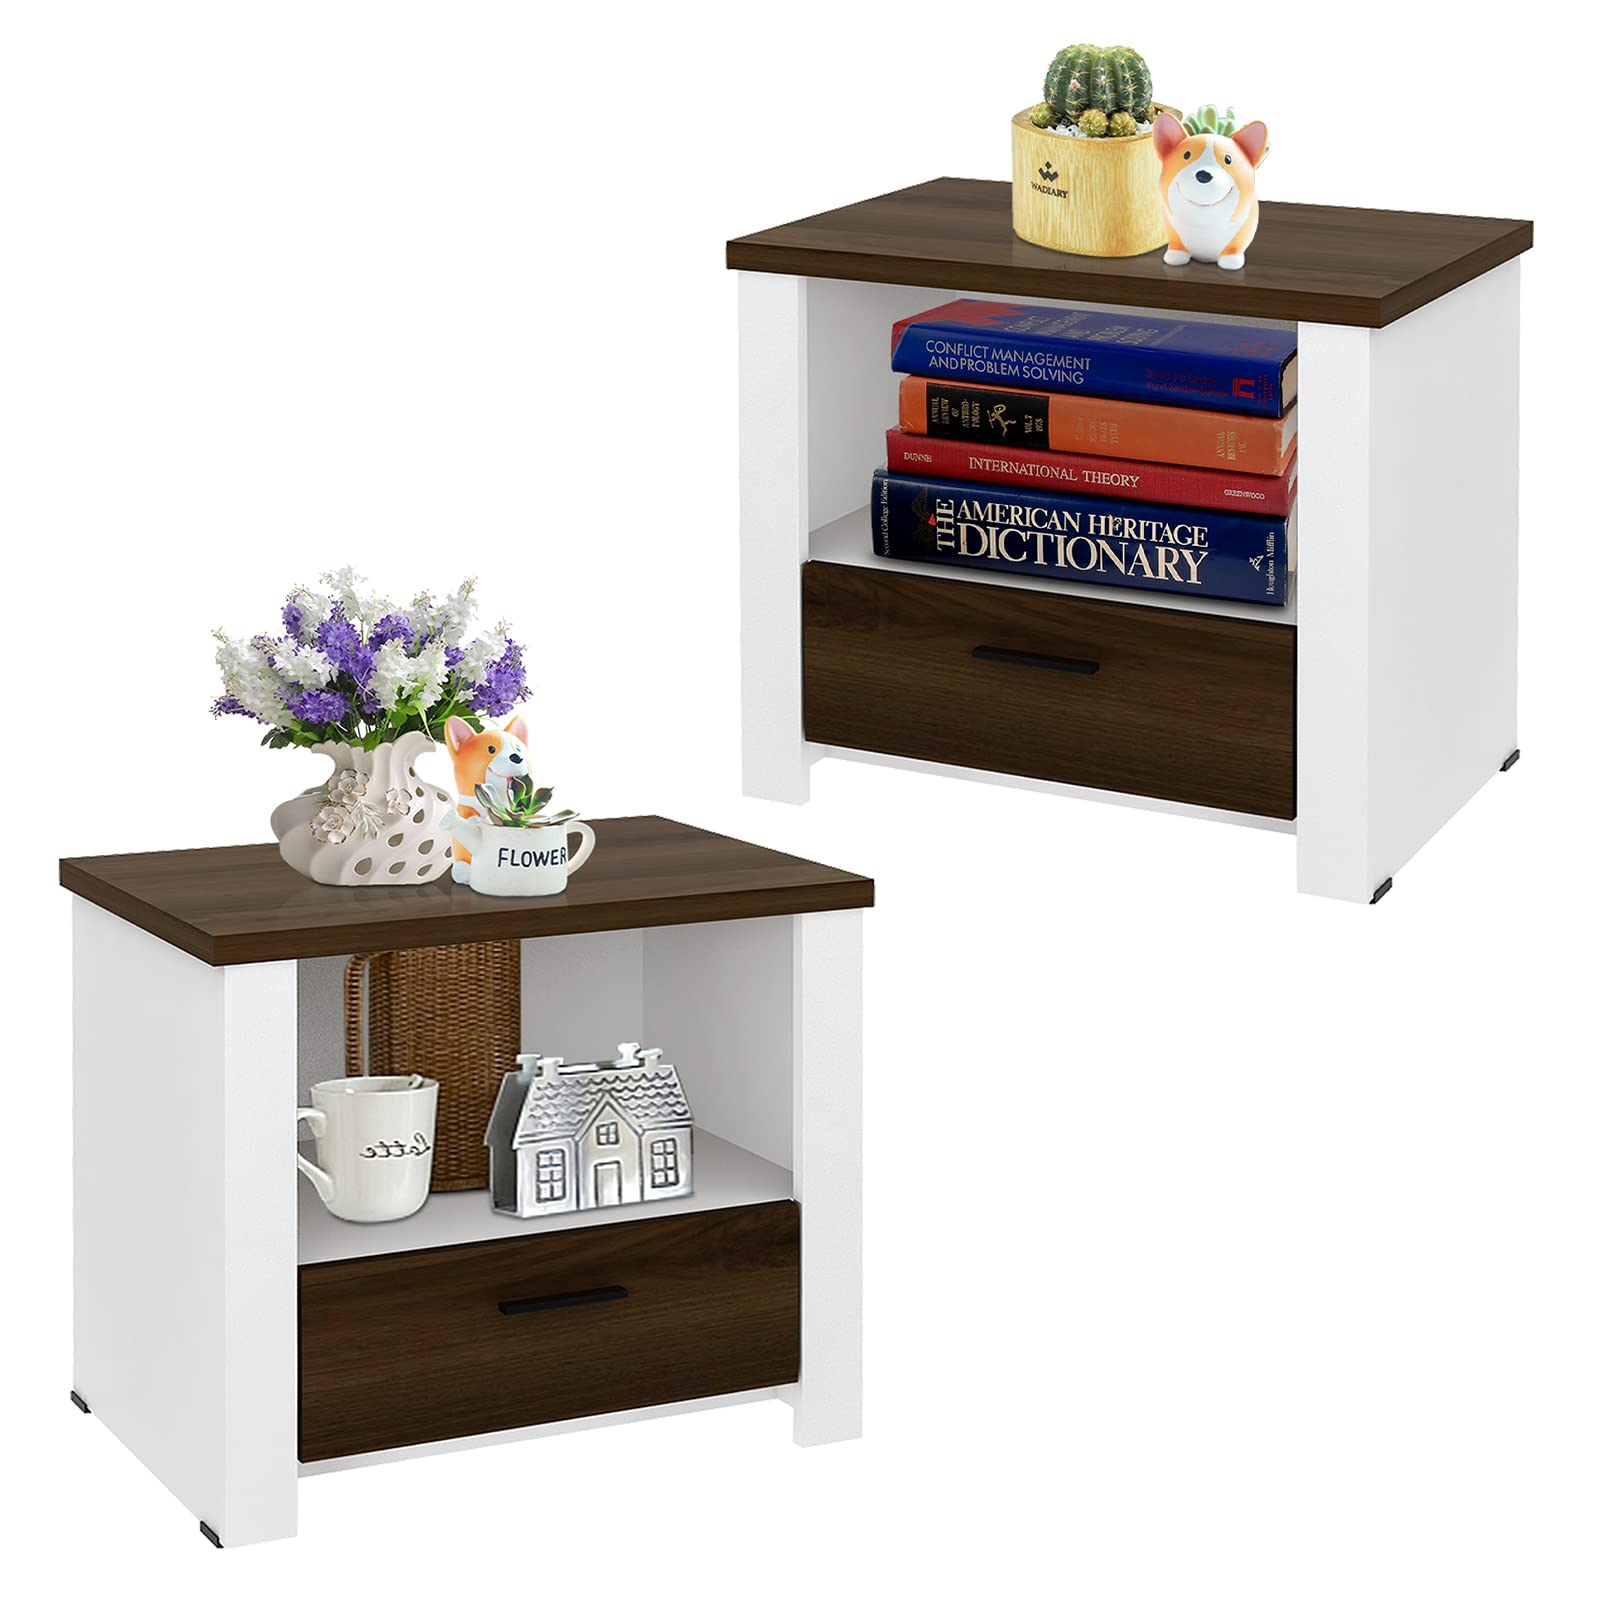 Giantex Nightstand, End Table with Glide Sliding Drawer & Open Cabinet, Modern Sofa Side Table for Living Room